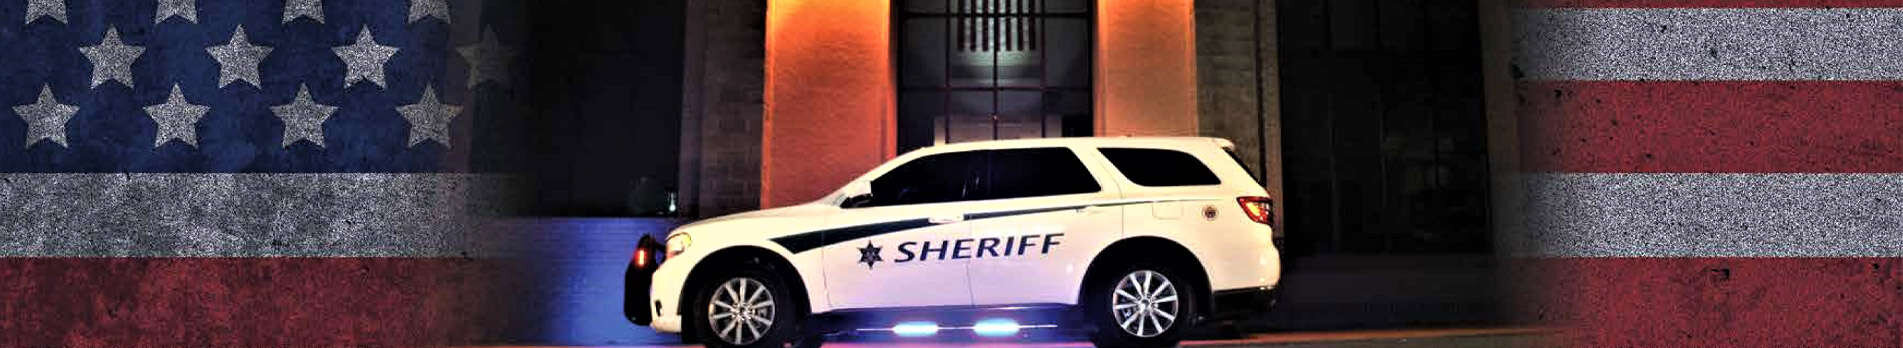 Sheriff SUV parked in front of a building.